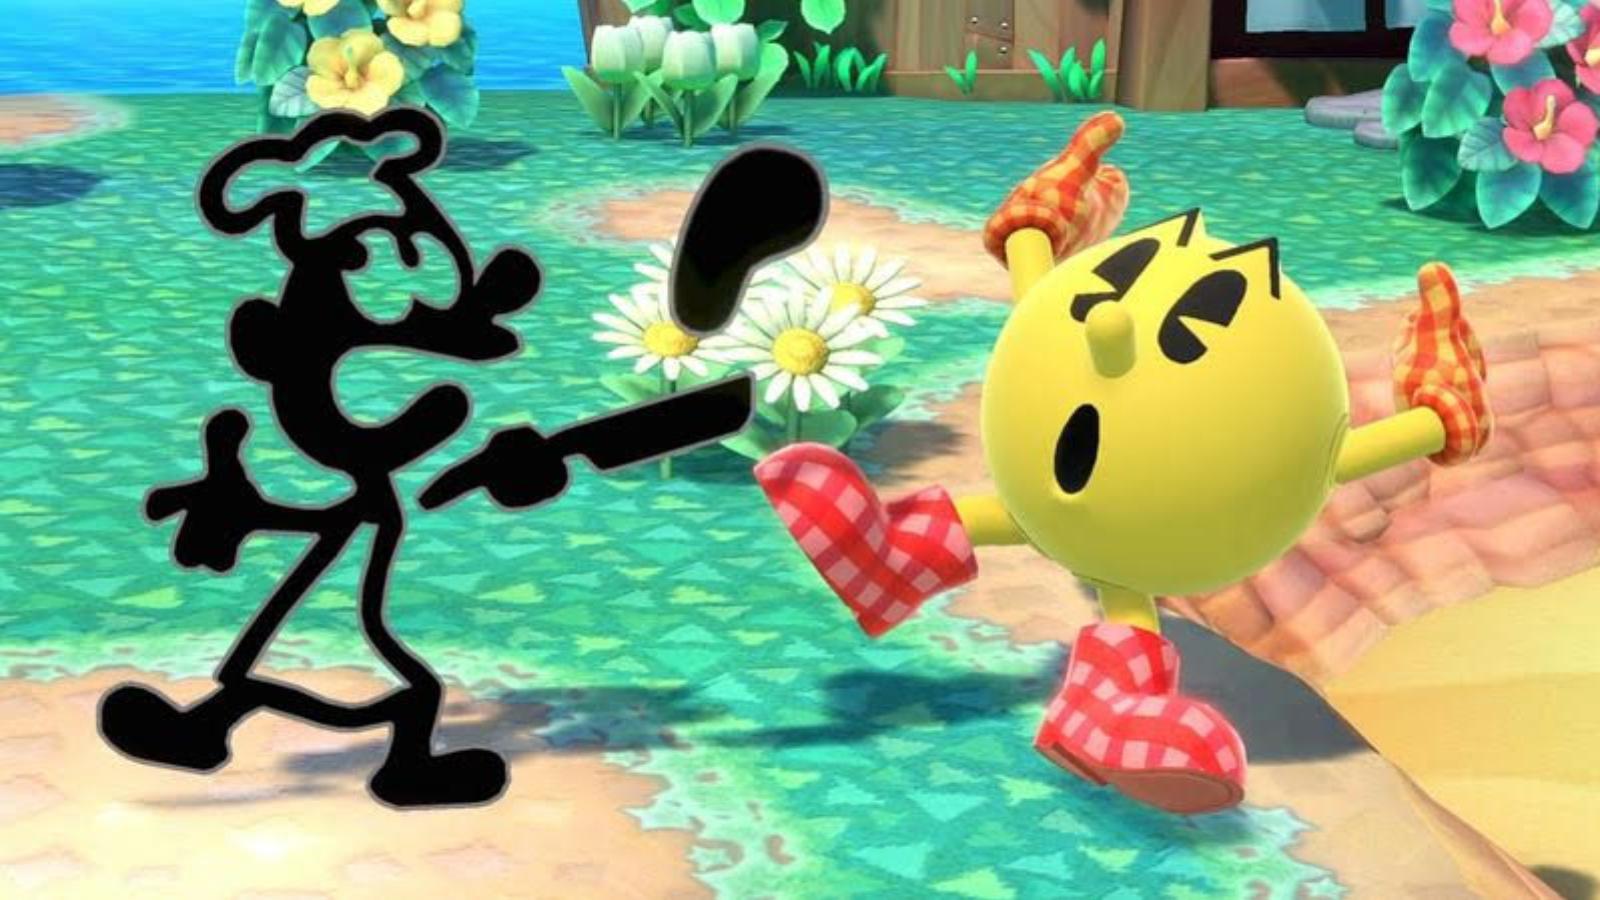 mr game and watch cooks pacman in smash